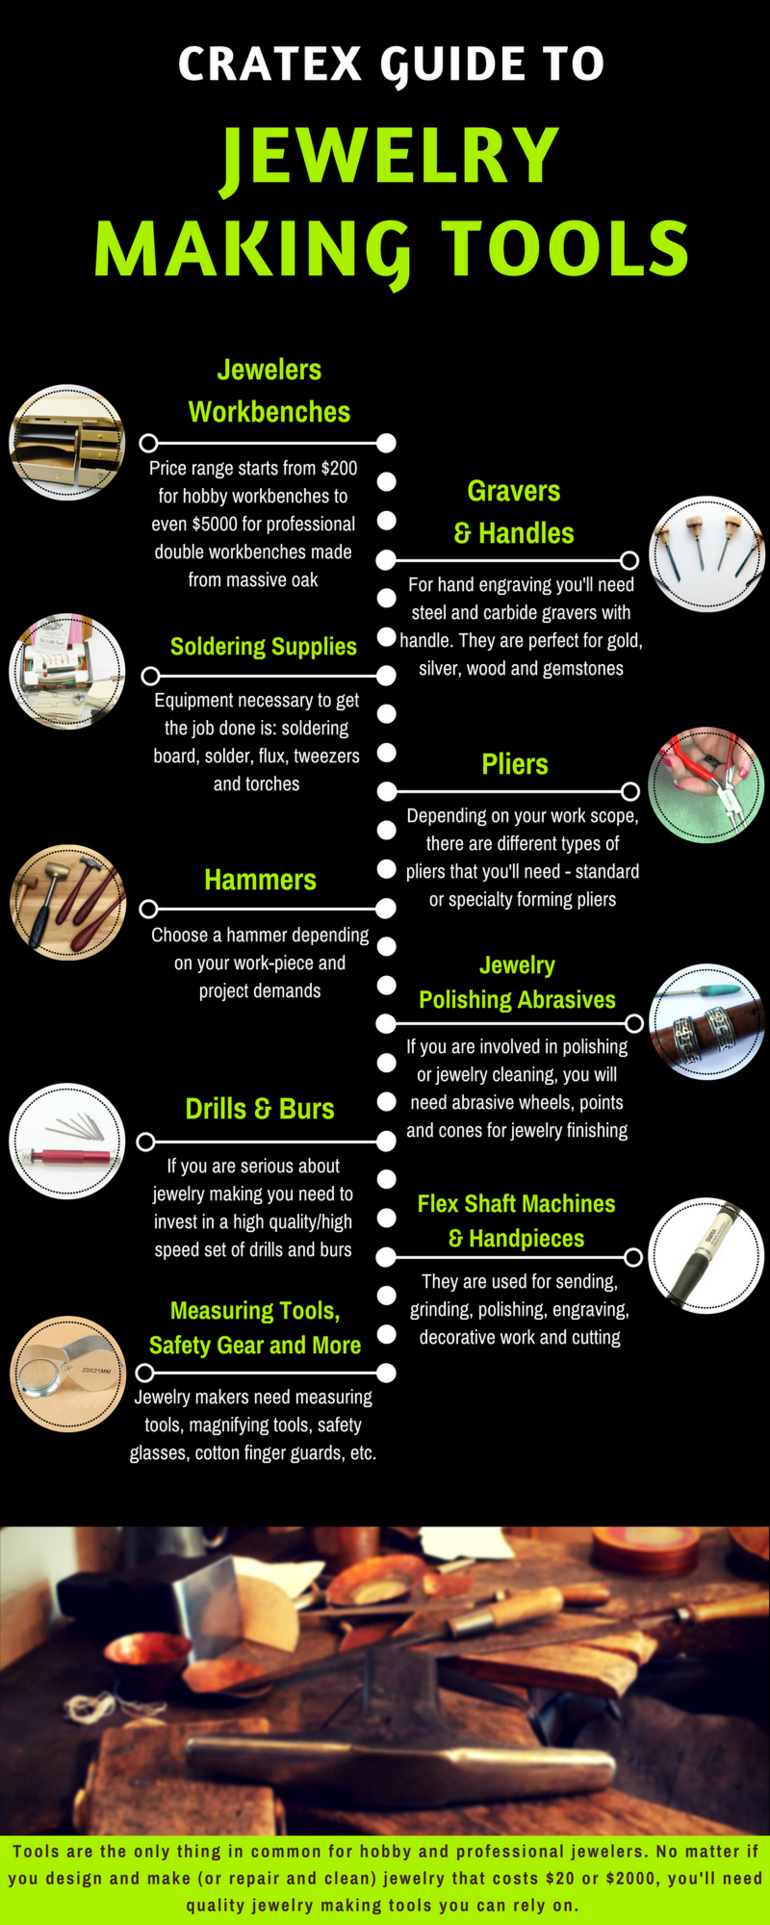 Cratex guide to jewerly making tools (Infographic)